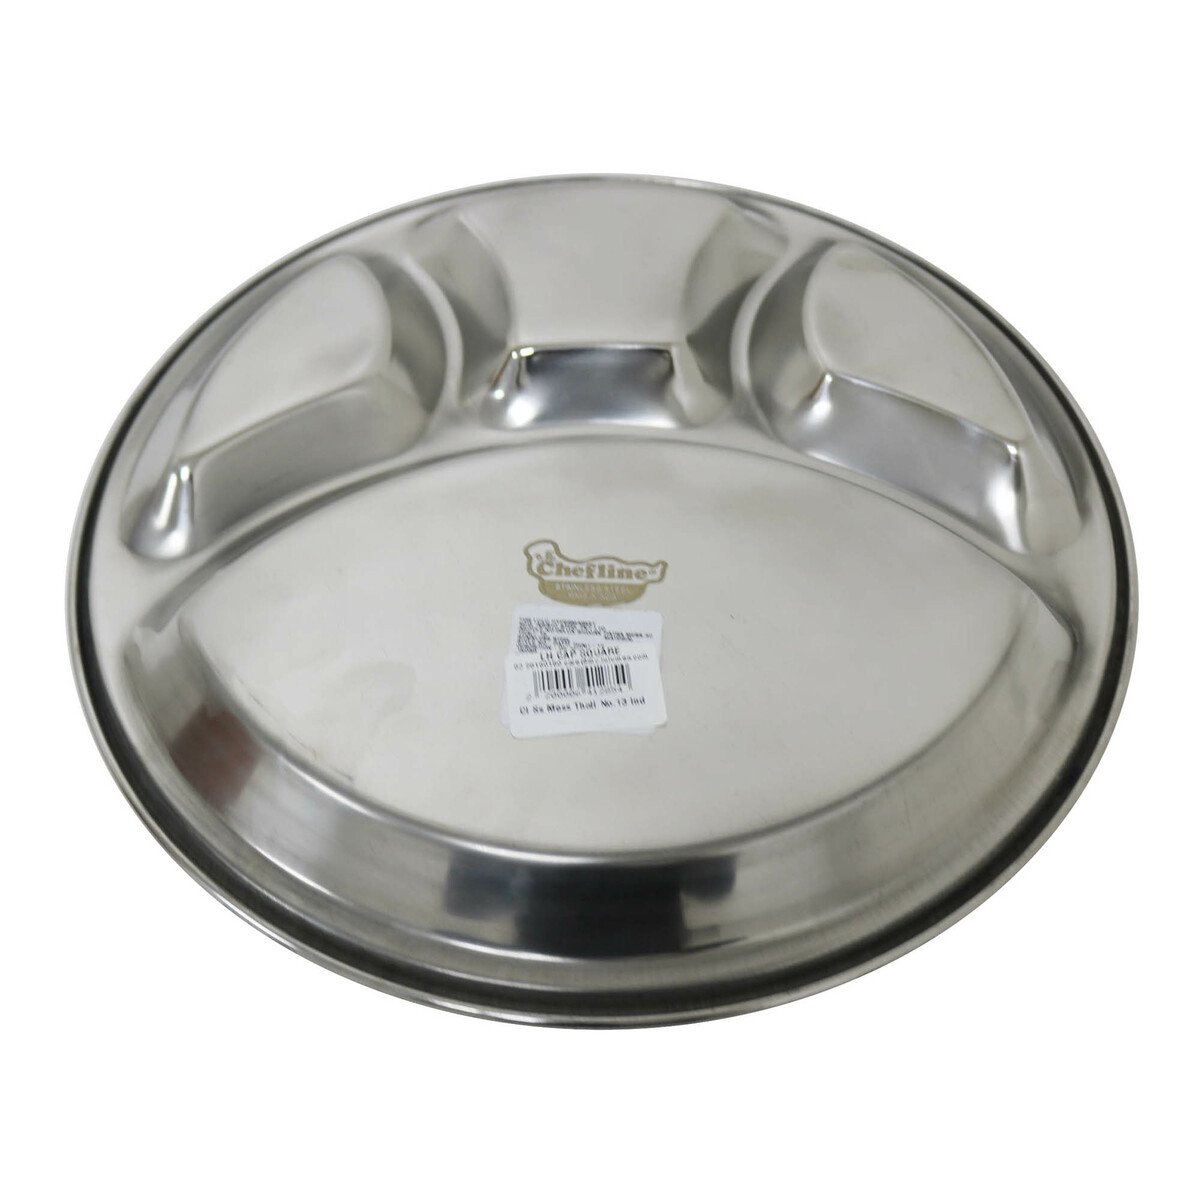 Chefline Stainless Steel Mess Thali No.13 Ind